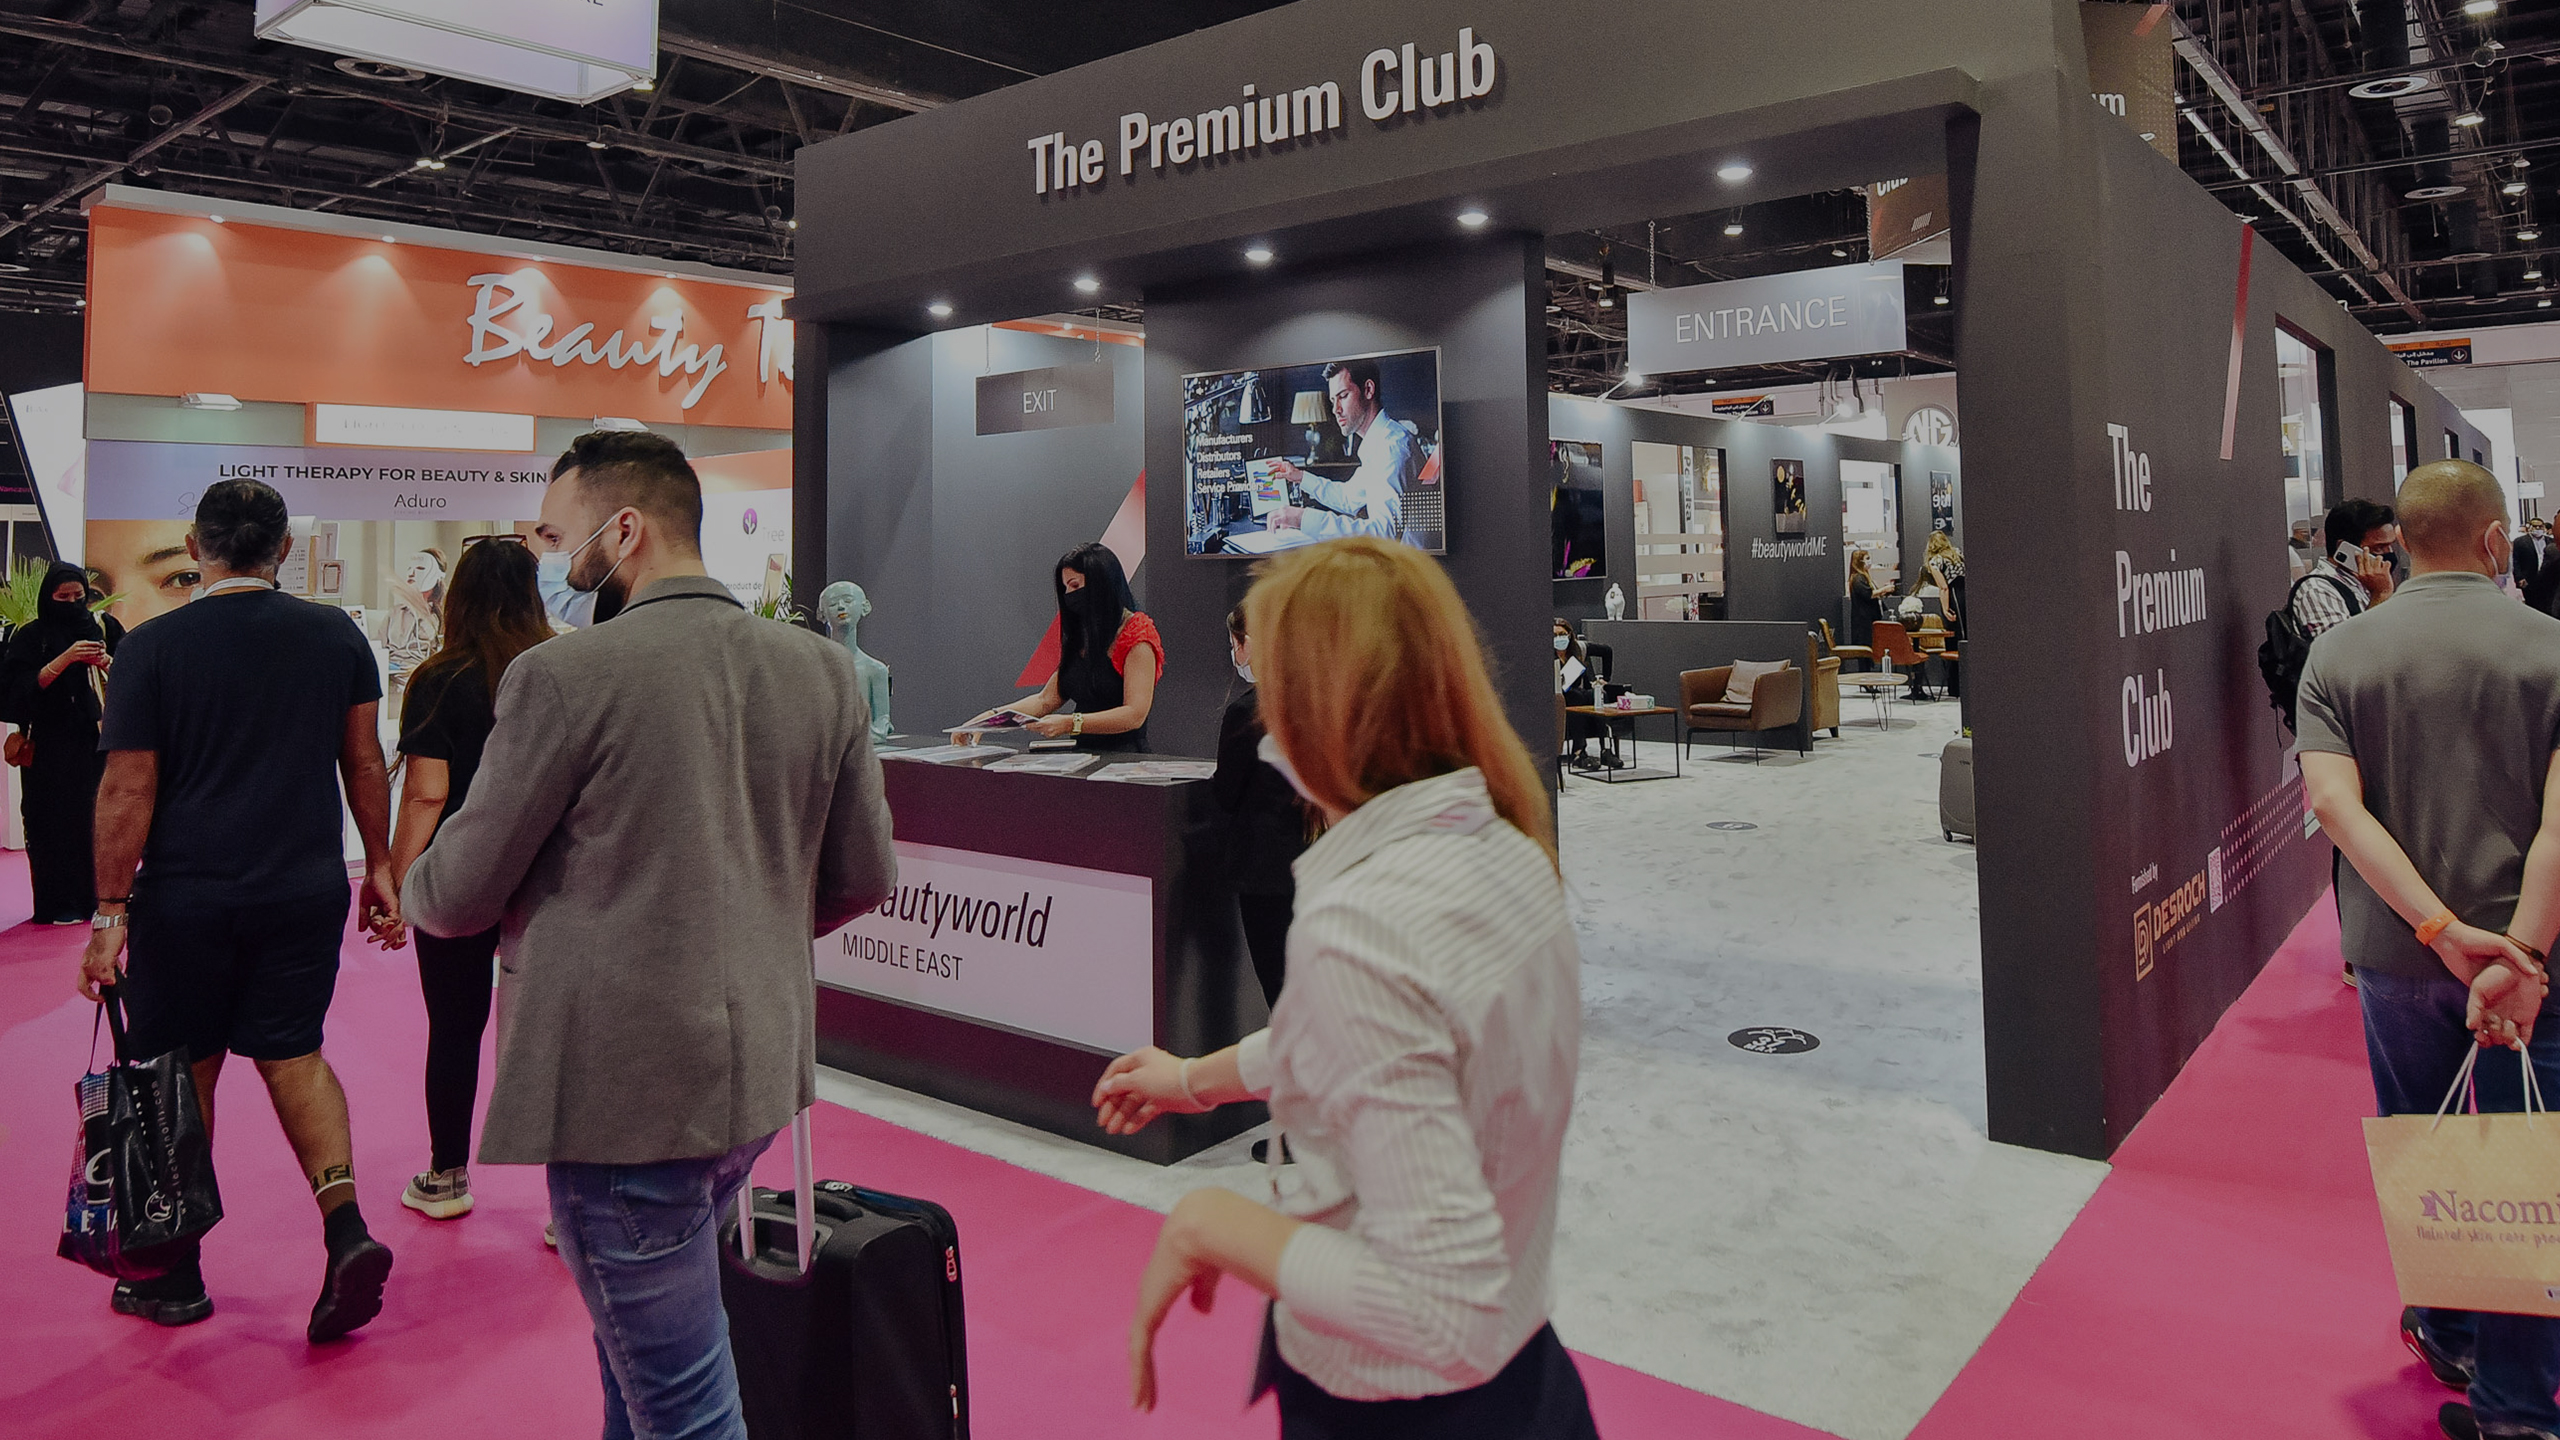 Beautyworld Middle East - The Premium Club